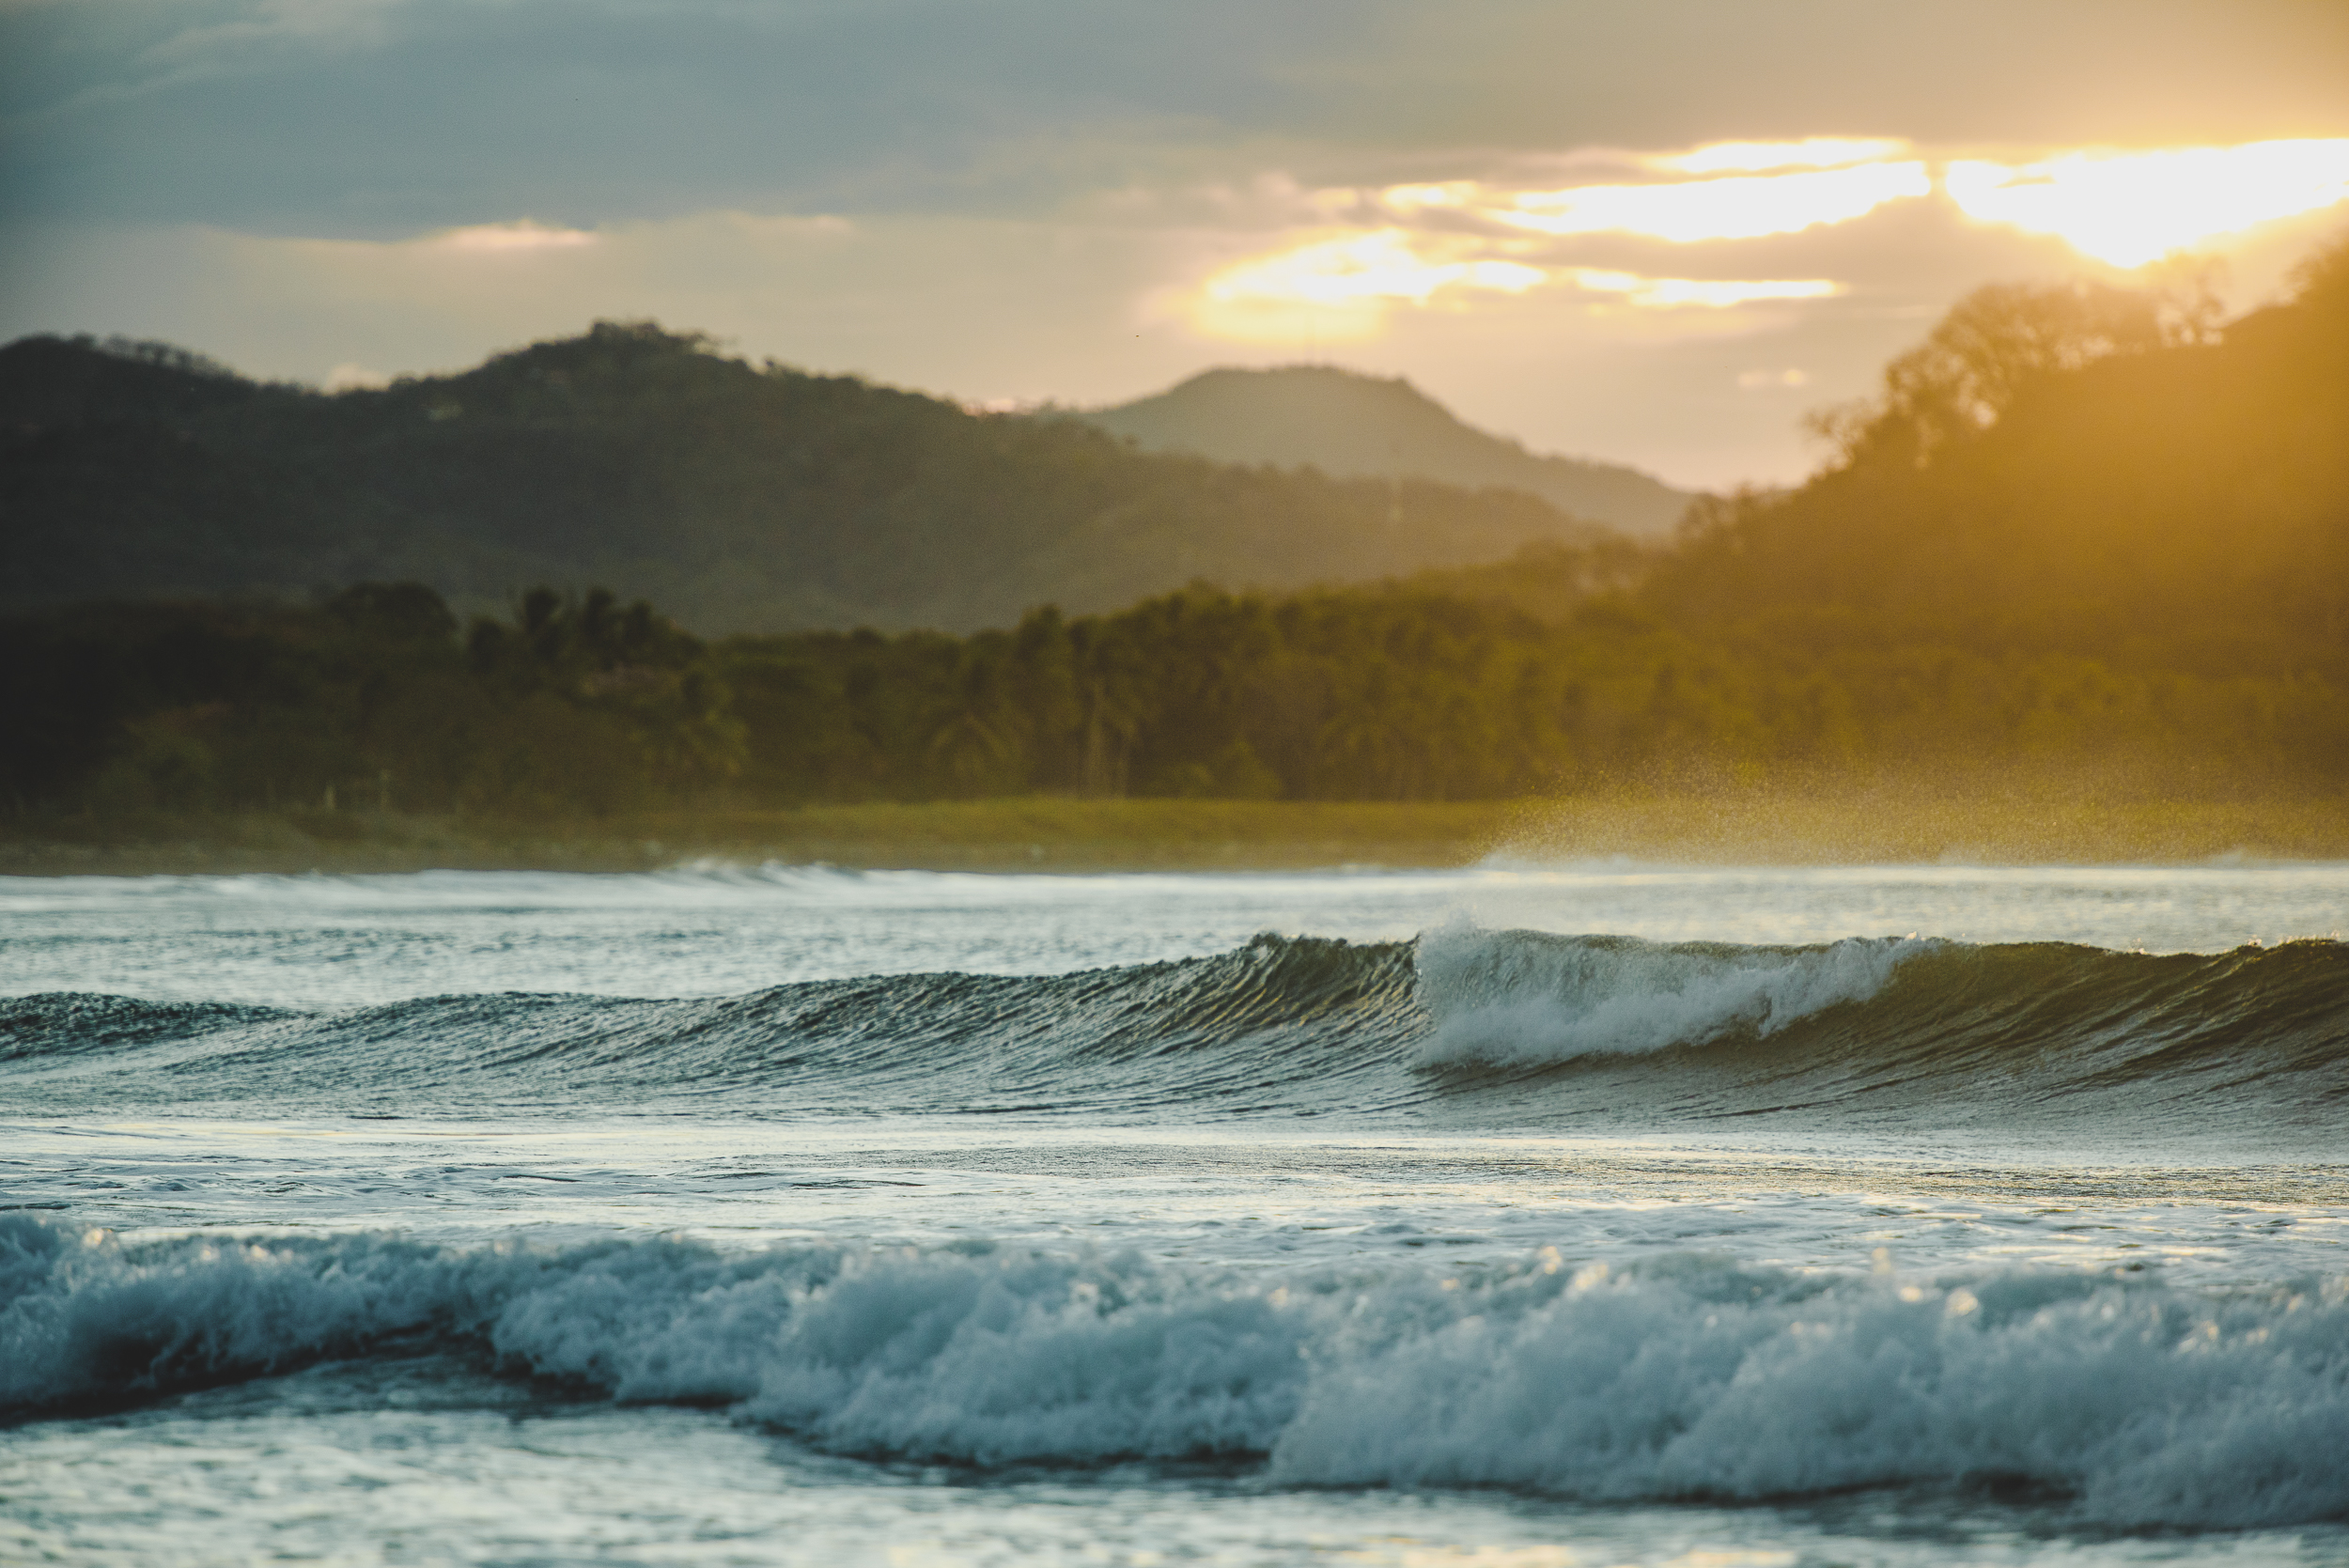 Sunlight on the waves in costa rica